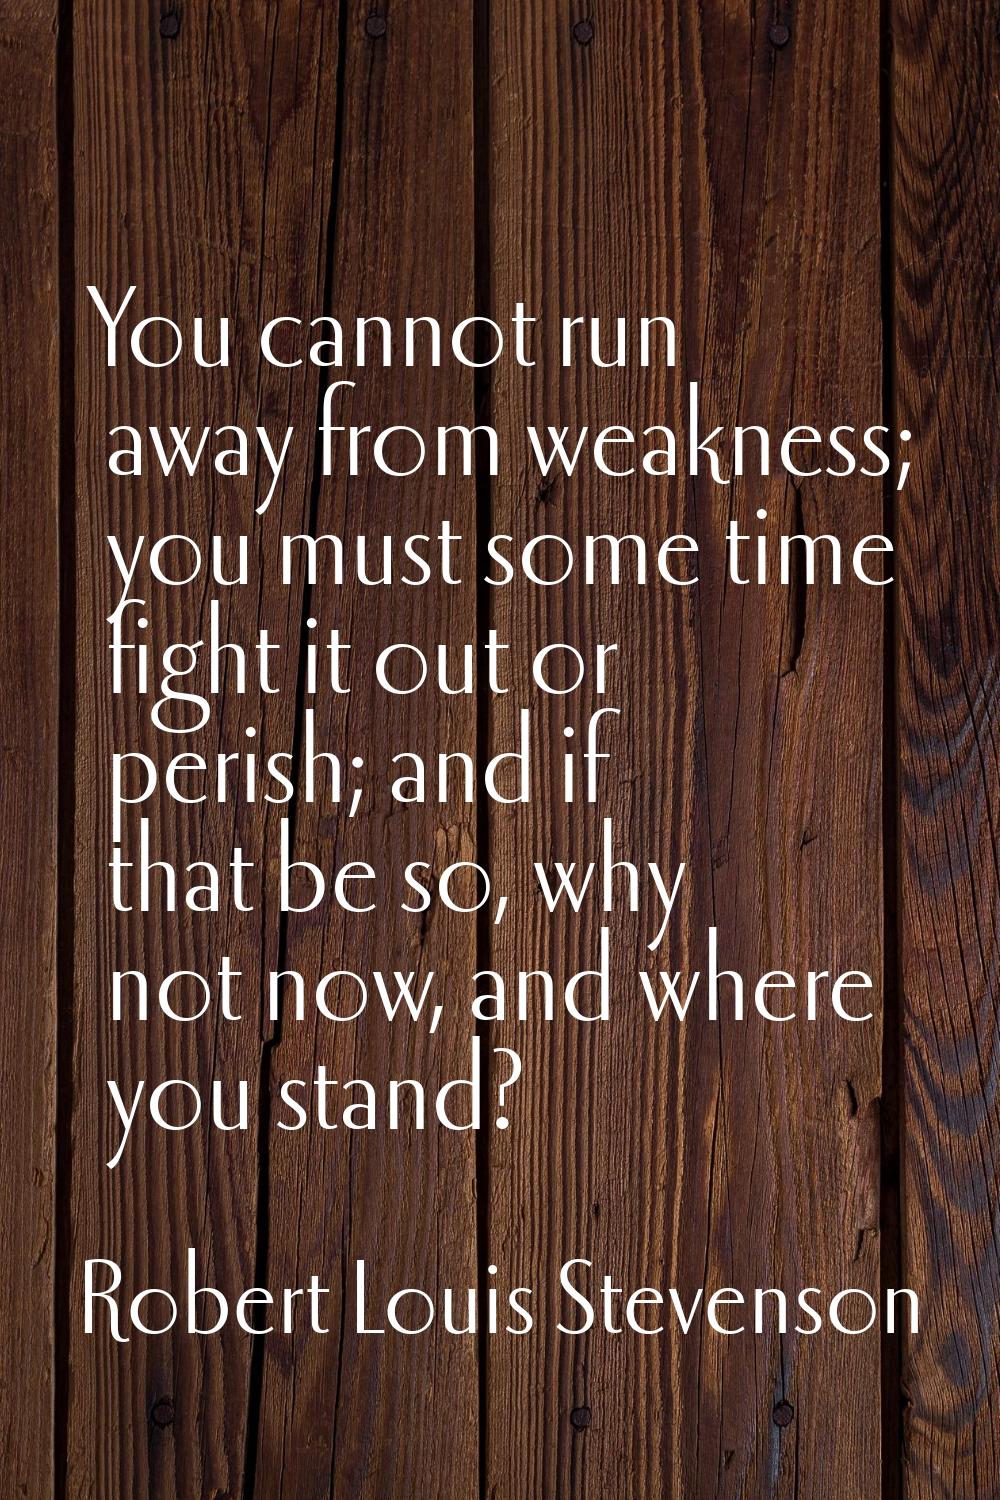 You cannot run away from weakness; you must some time fight it out or perish; and if that be so, wh